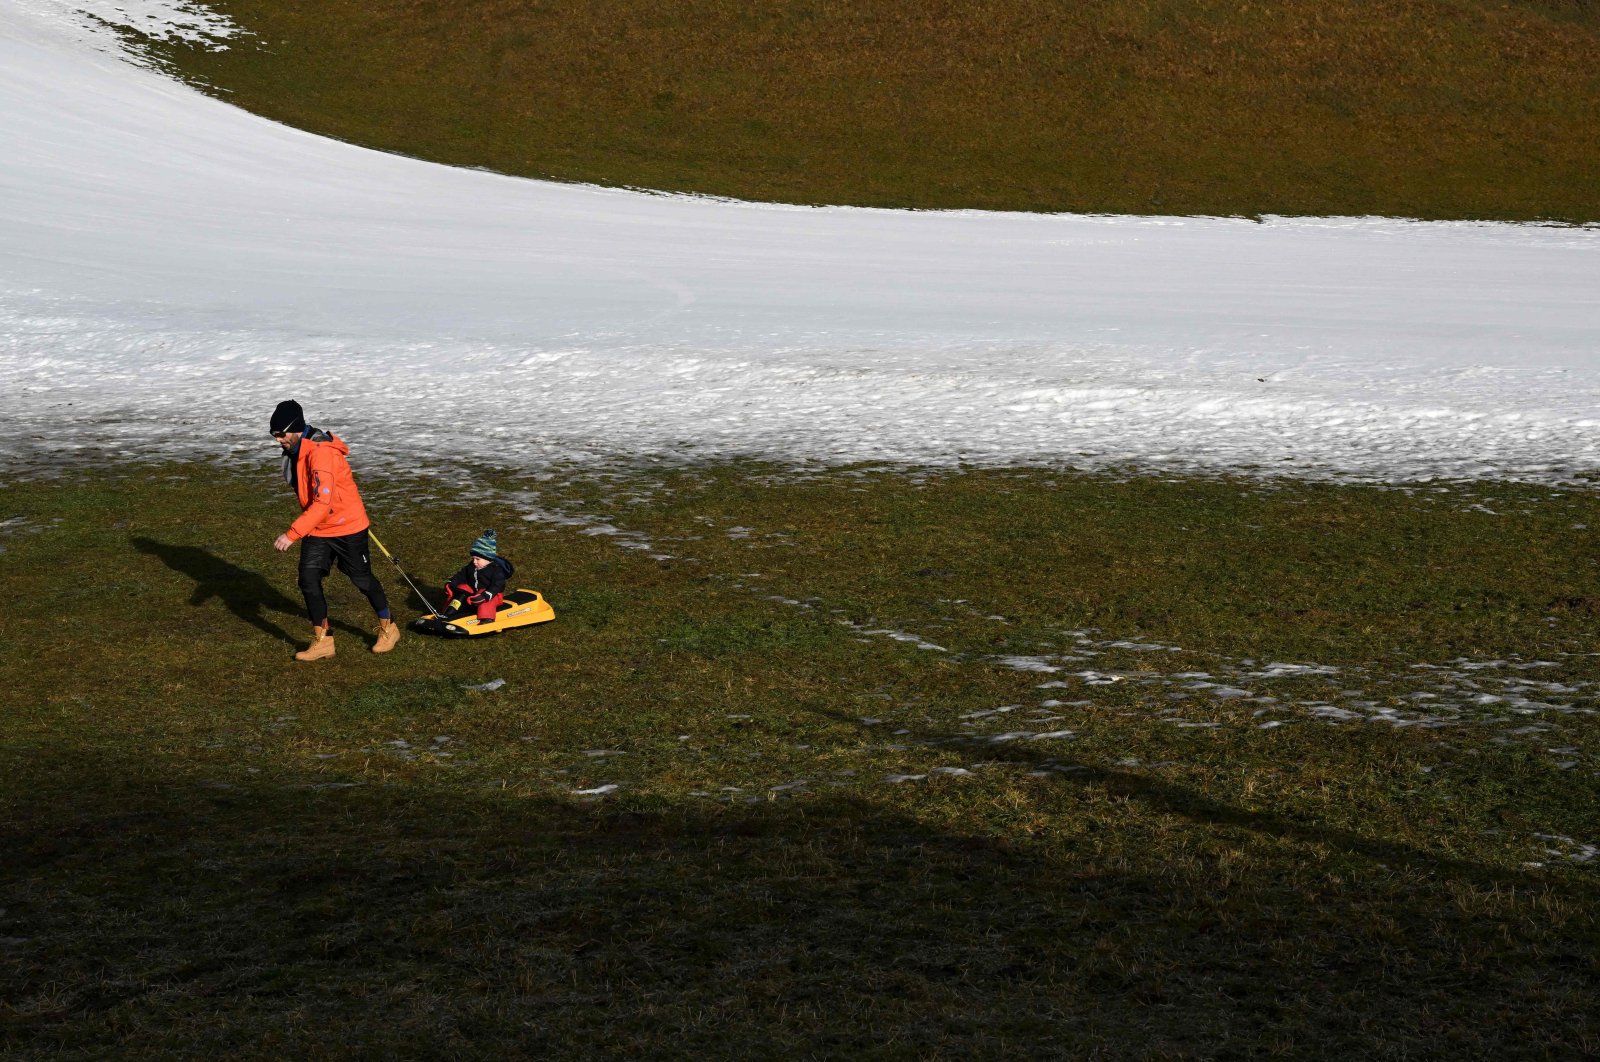 A man pulls a child on a sled next to an artificial snow slope in Filzmoos, Austria, Jan. 6, 2023. (AFP Photo)